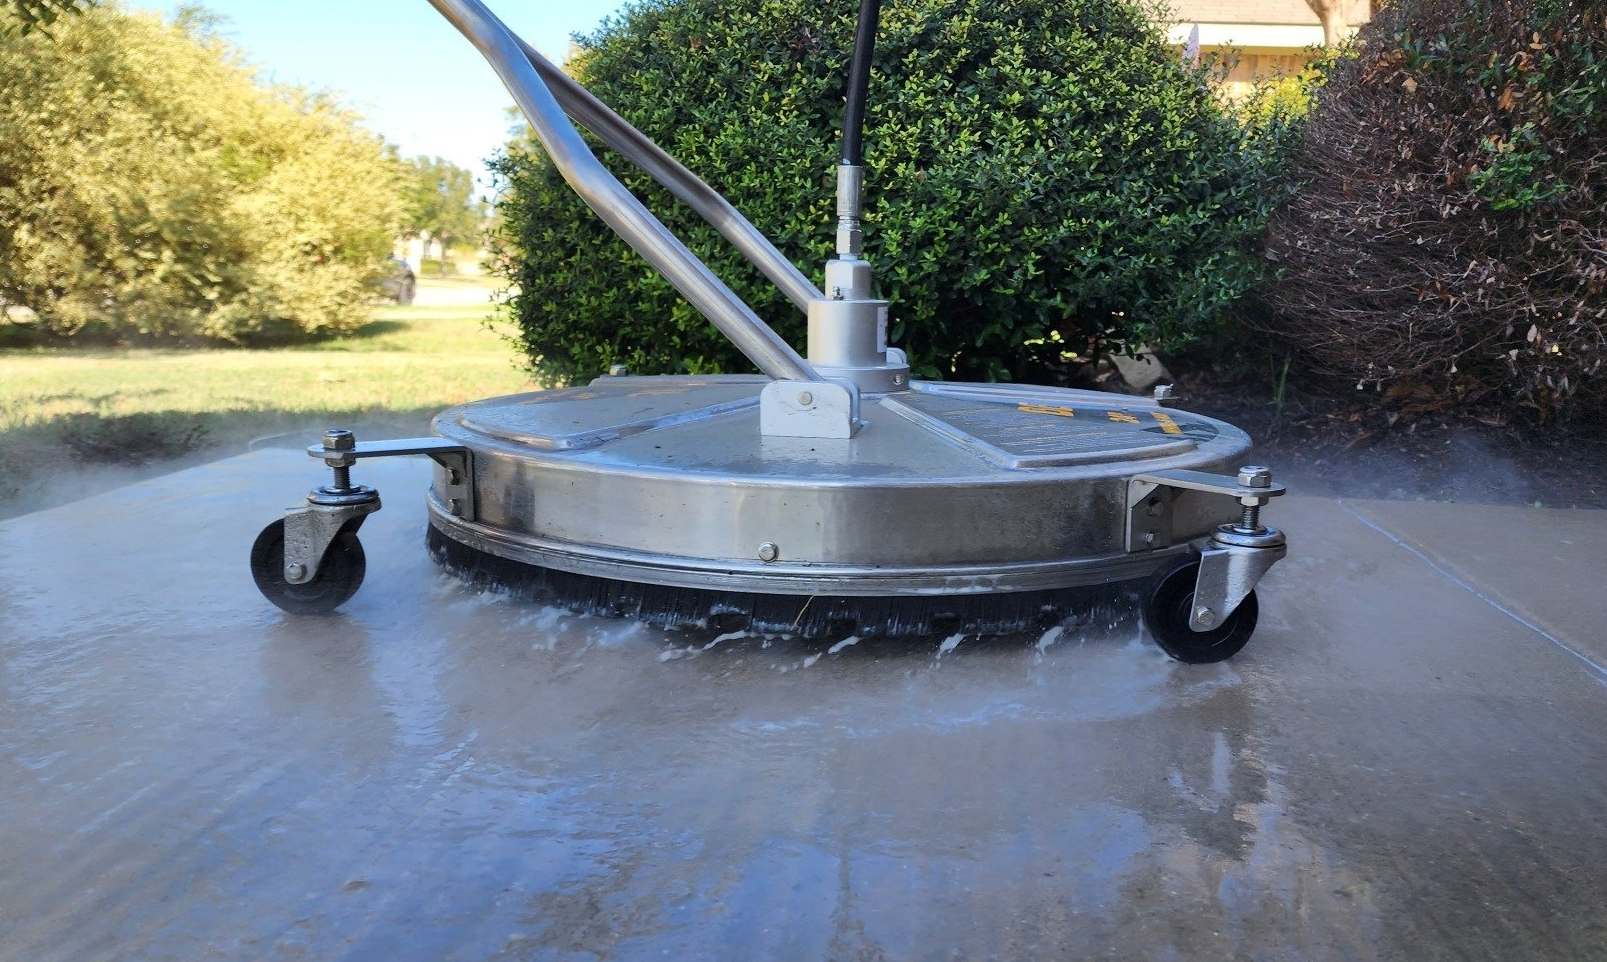 Our power washing machine in action at a home in Kyle, Tx